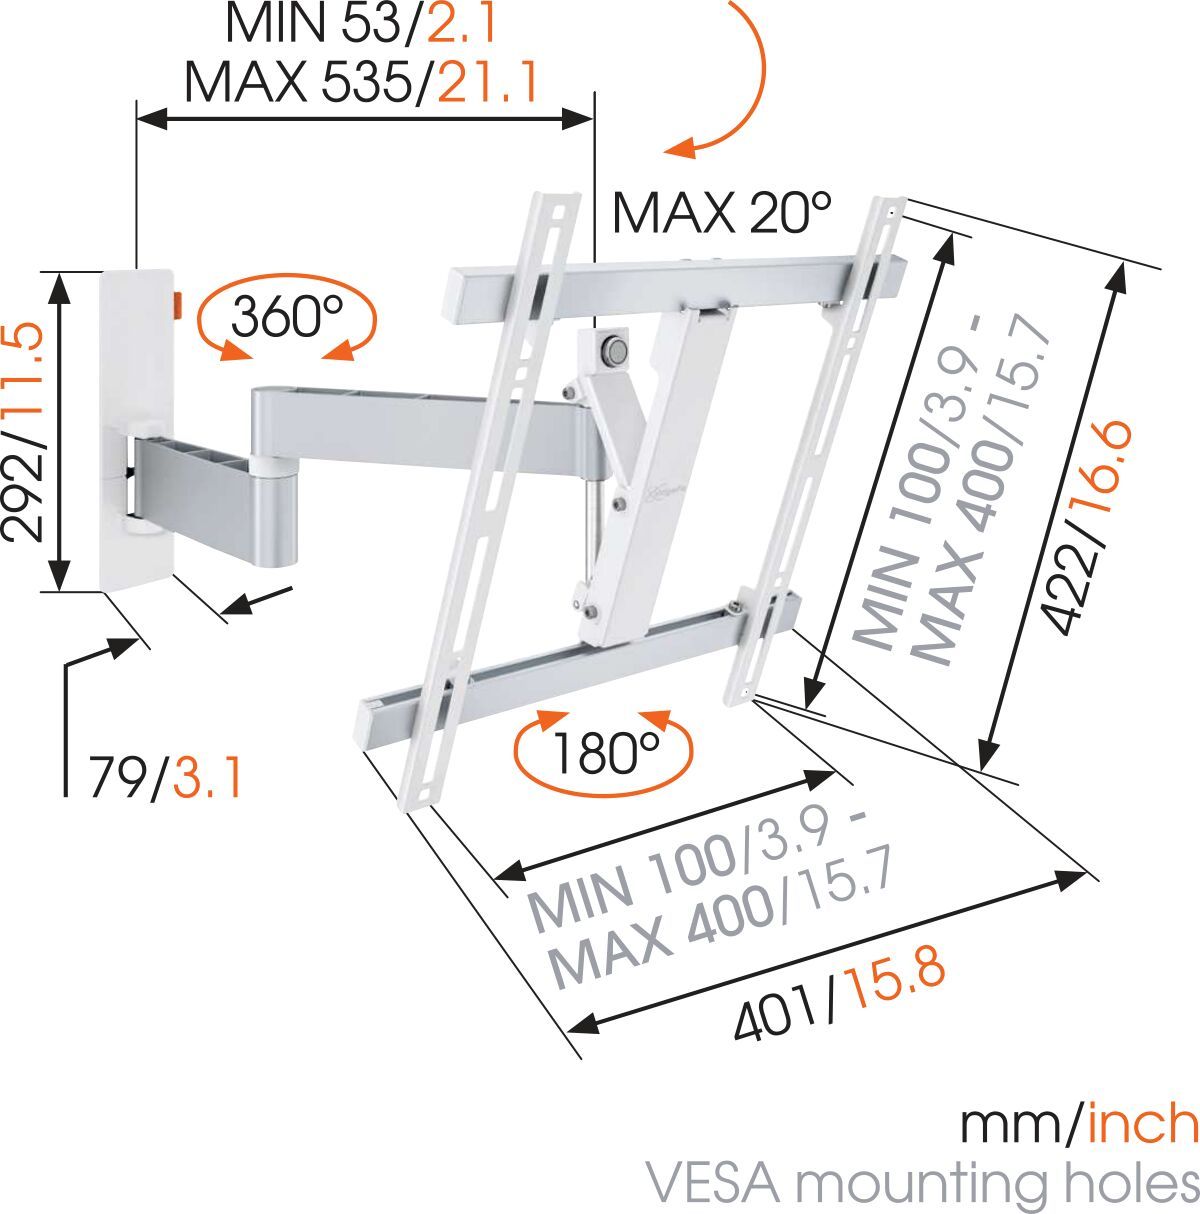 Vogel's WALL 2245 Full-Motion TV Wall Mount (white) - Suitable for 32 up to 55 inch TVs - Full motion (up to 180°) - Tilt up to 20° - Dimensions